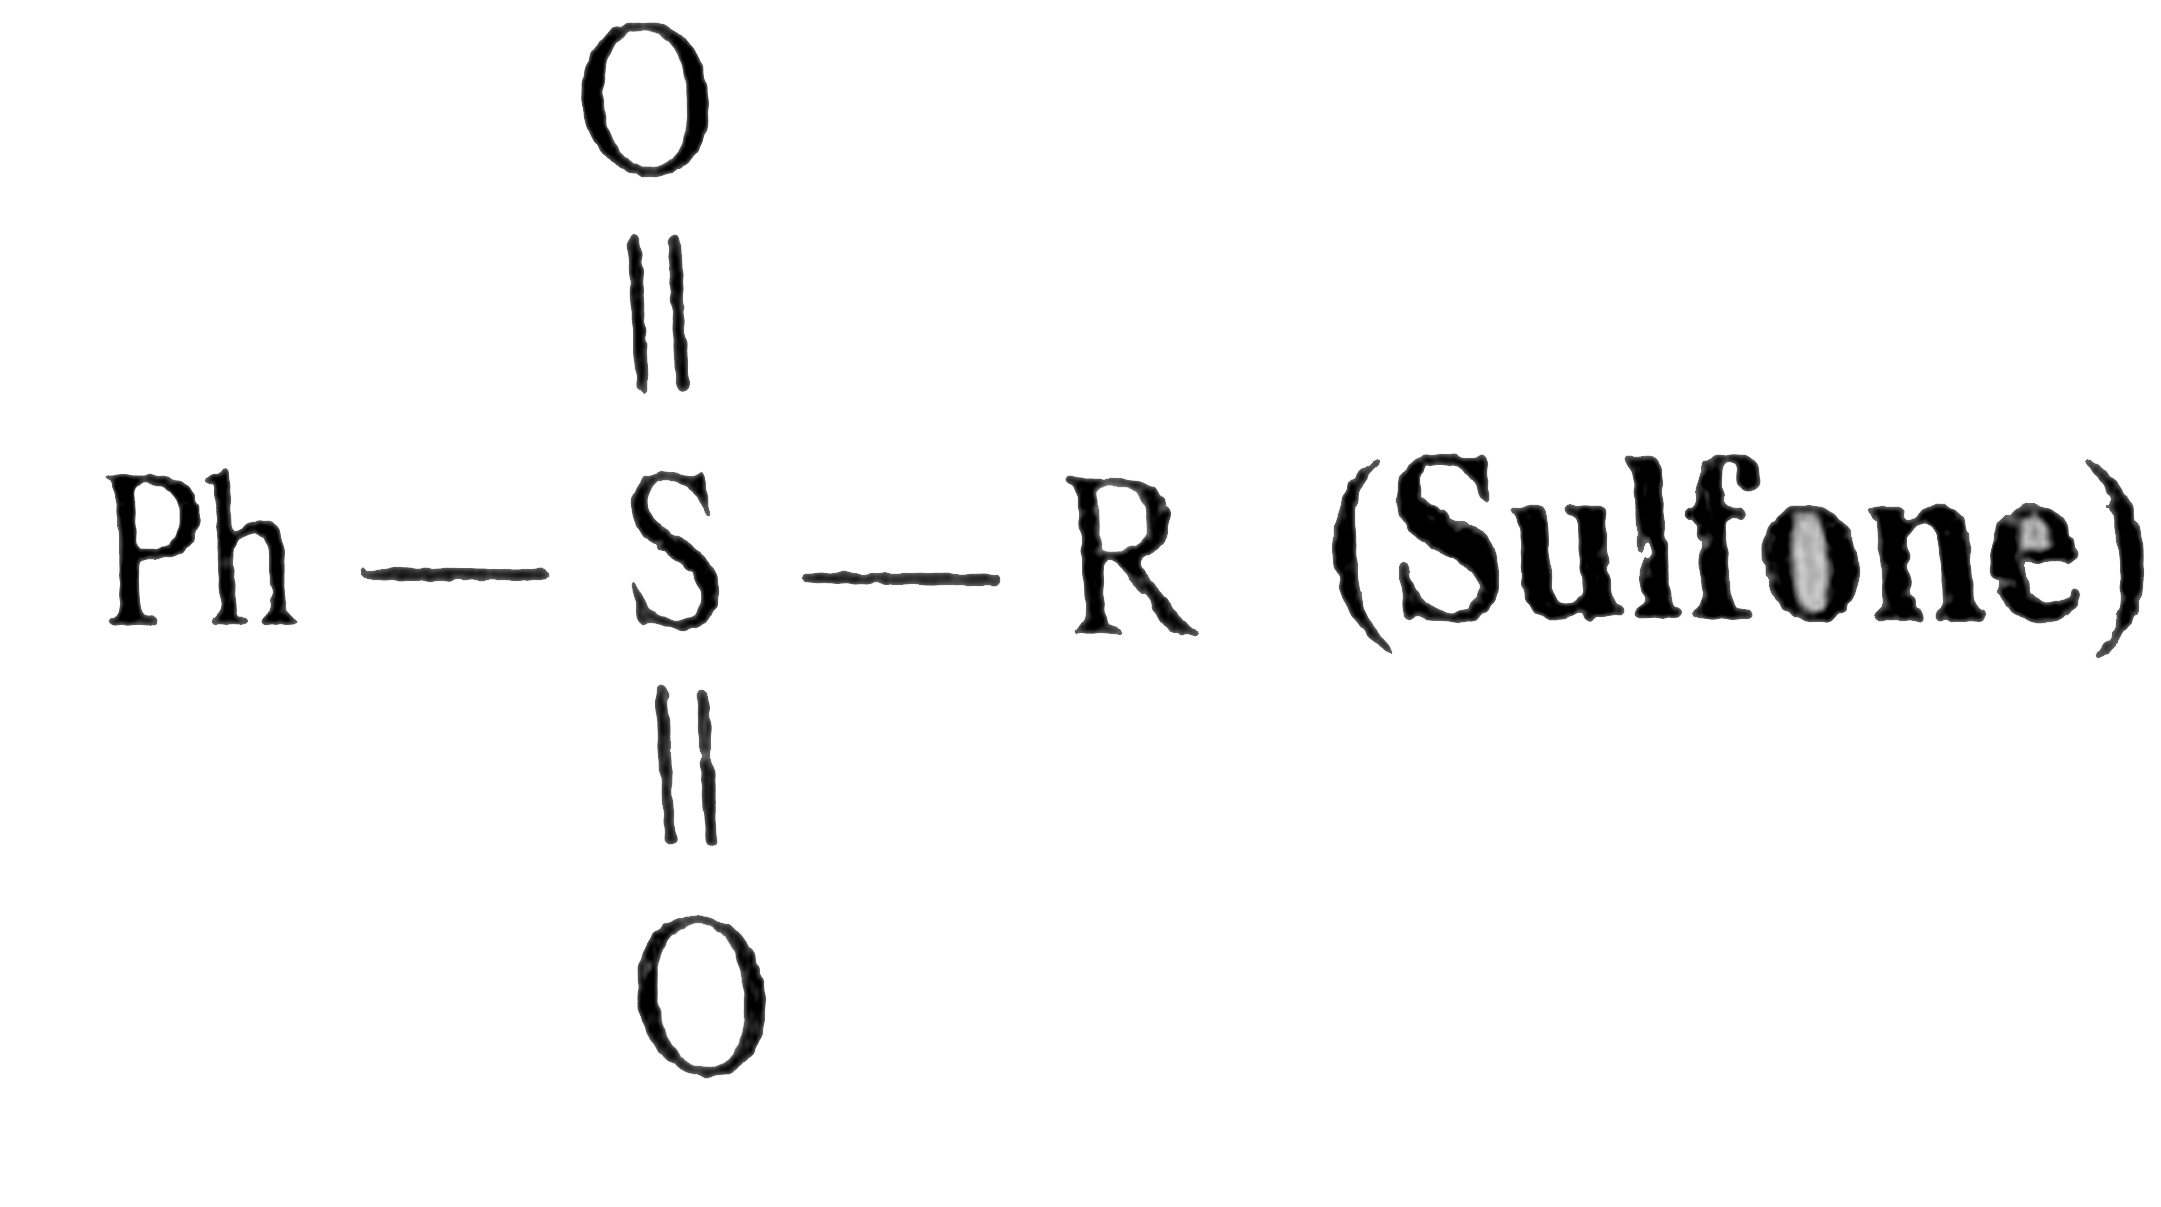 Arrange the following compounds in decreasing  order of their property as indicated:   a. Reactivity and orientation of (I) Ph - underset(..)overset(o+)(S) - Et(2) and (II) PhNO.   Activating effects of the following o,p- directions:   I. -O^(o-). II, -OH, III. -NH(2)  IV. -NHCOCH(3) V. -OCOCH(3)   c. Respectivity and orientation of I. PhOEt and II. PhSEt   d. Categories the following subsituents as:   I. Activating,   ii. Deactivating,   iii. o, p, or m- directing.   I.    II.     III. Ph - ddot(S) - R   SE reactivty of:   I. PhNO, II.    f. SE reactivity and orientation of:   1. PhF, II. PhCl, III. PhBr, IV. Phl